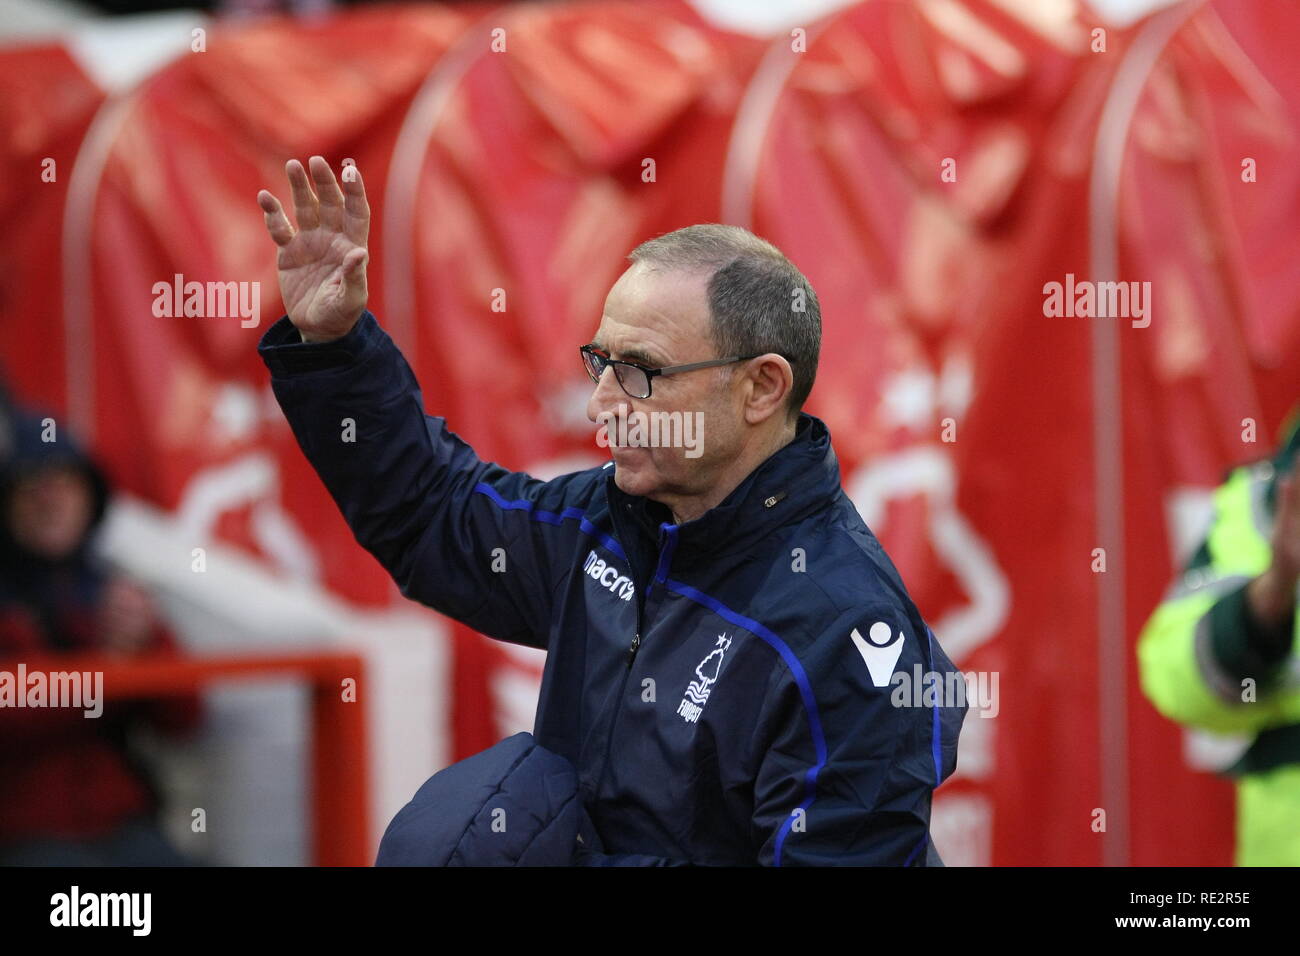 Nottingham, Nottinghamshire, UK. 19th January, 2018. Martin O'Neill greets the crowd and takes his place in the Forest dugout as he takes charge of Nottingham Forest for the first time since his appointment as manager. Credit: Simon Newbury/Alamy Live News Stock Photo